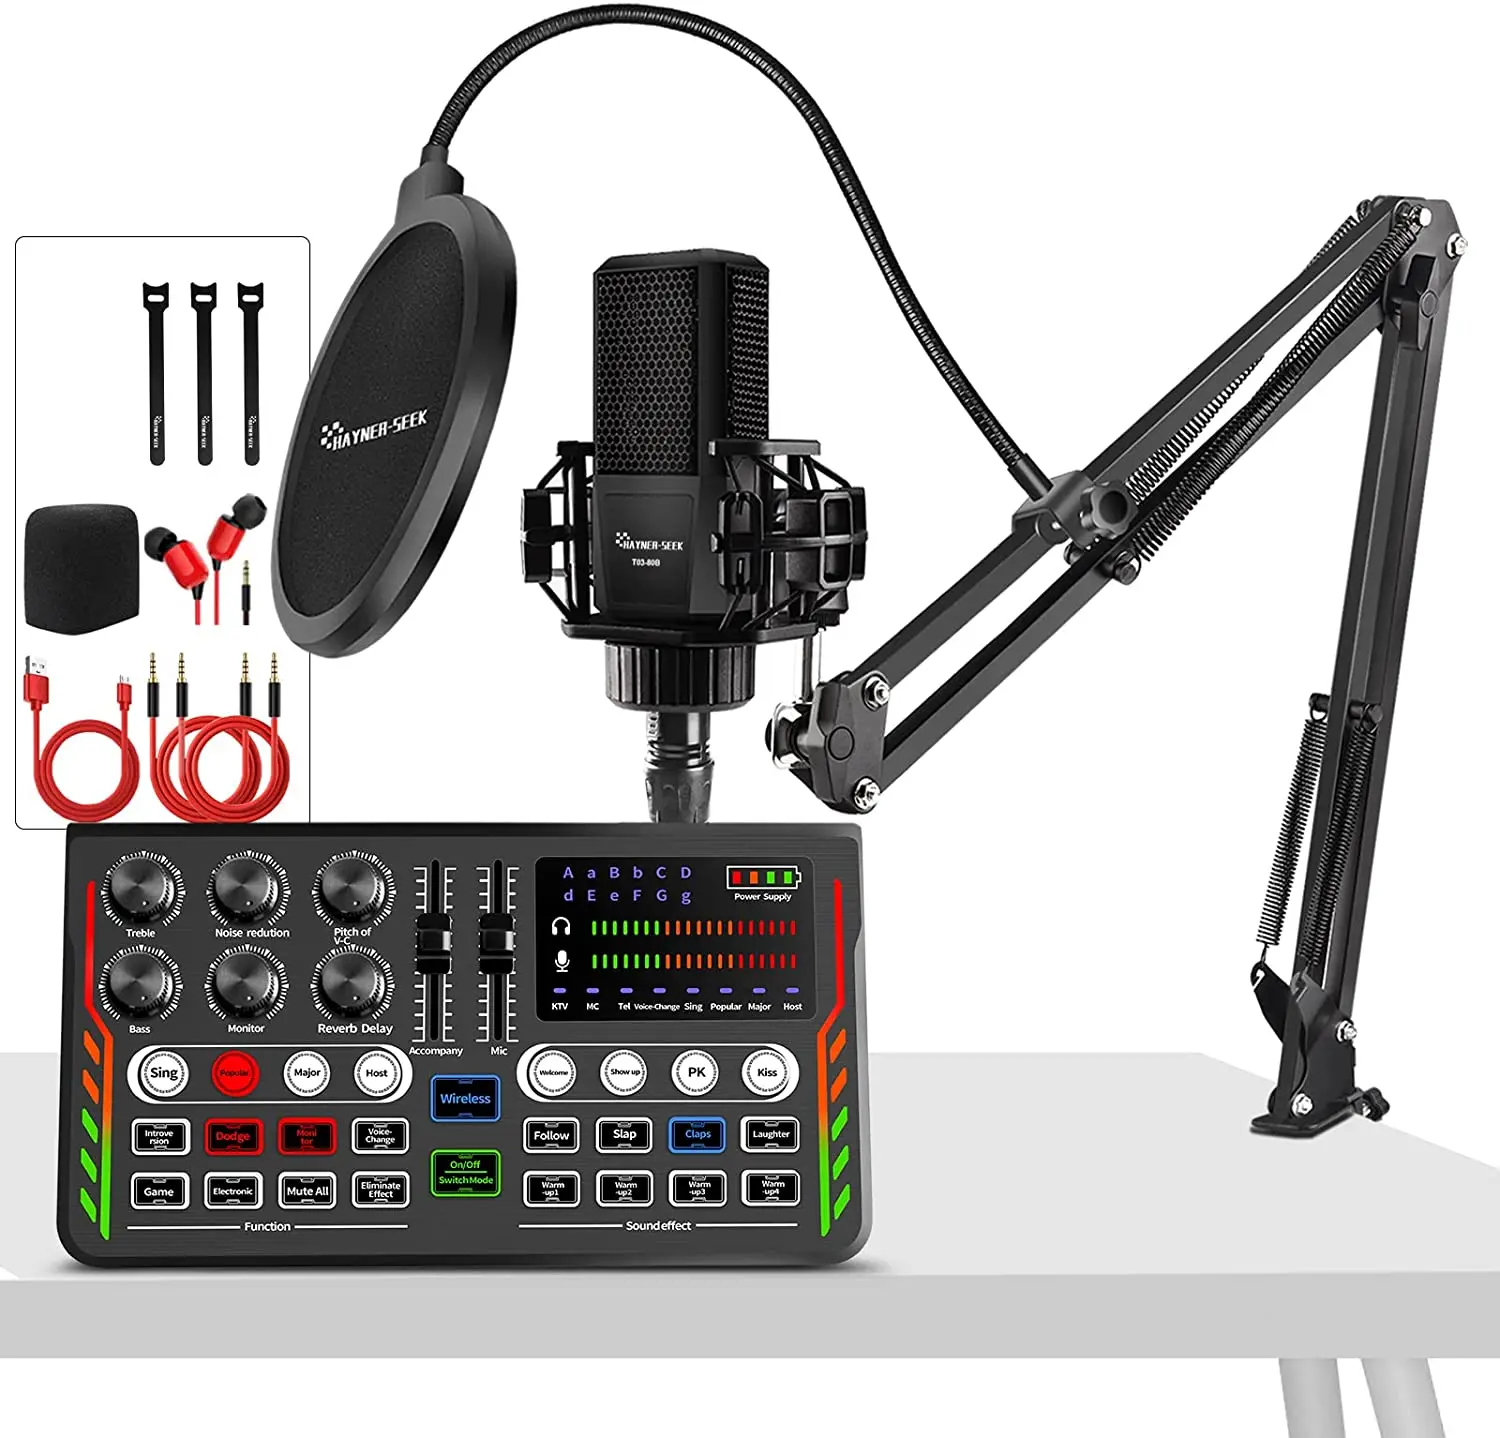 

Podcast Equipment Bundle Aluminum Alloy Panel with 48V Condenser Microphone ALL-IN-ONE Audio Interface with Sound DJ Mixer [DIY